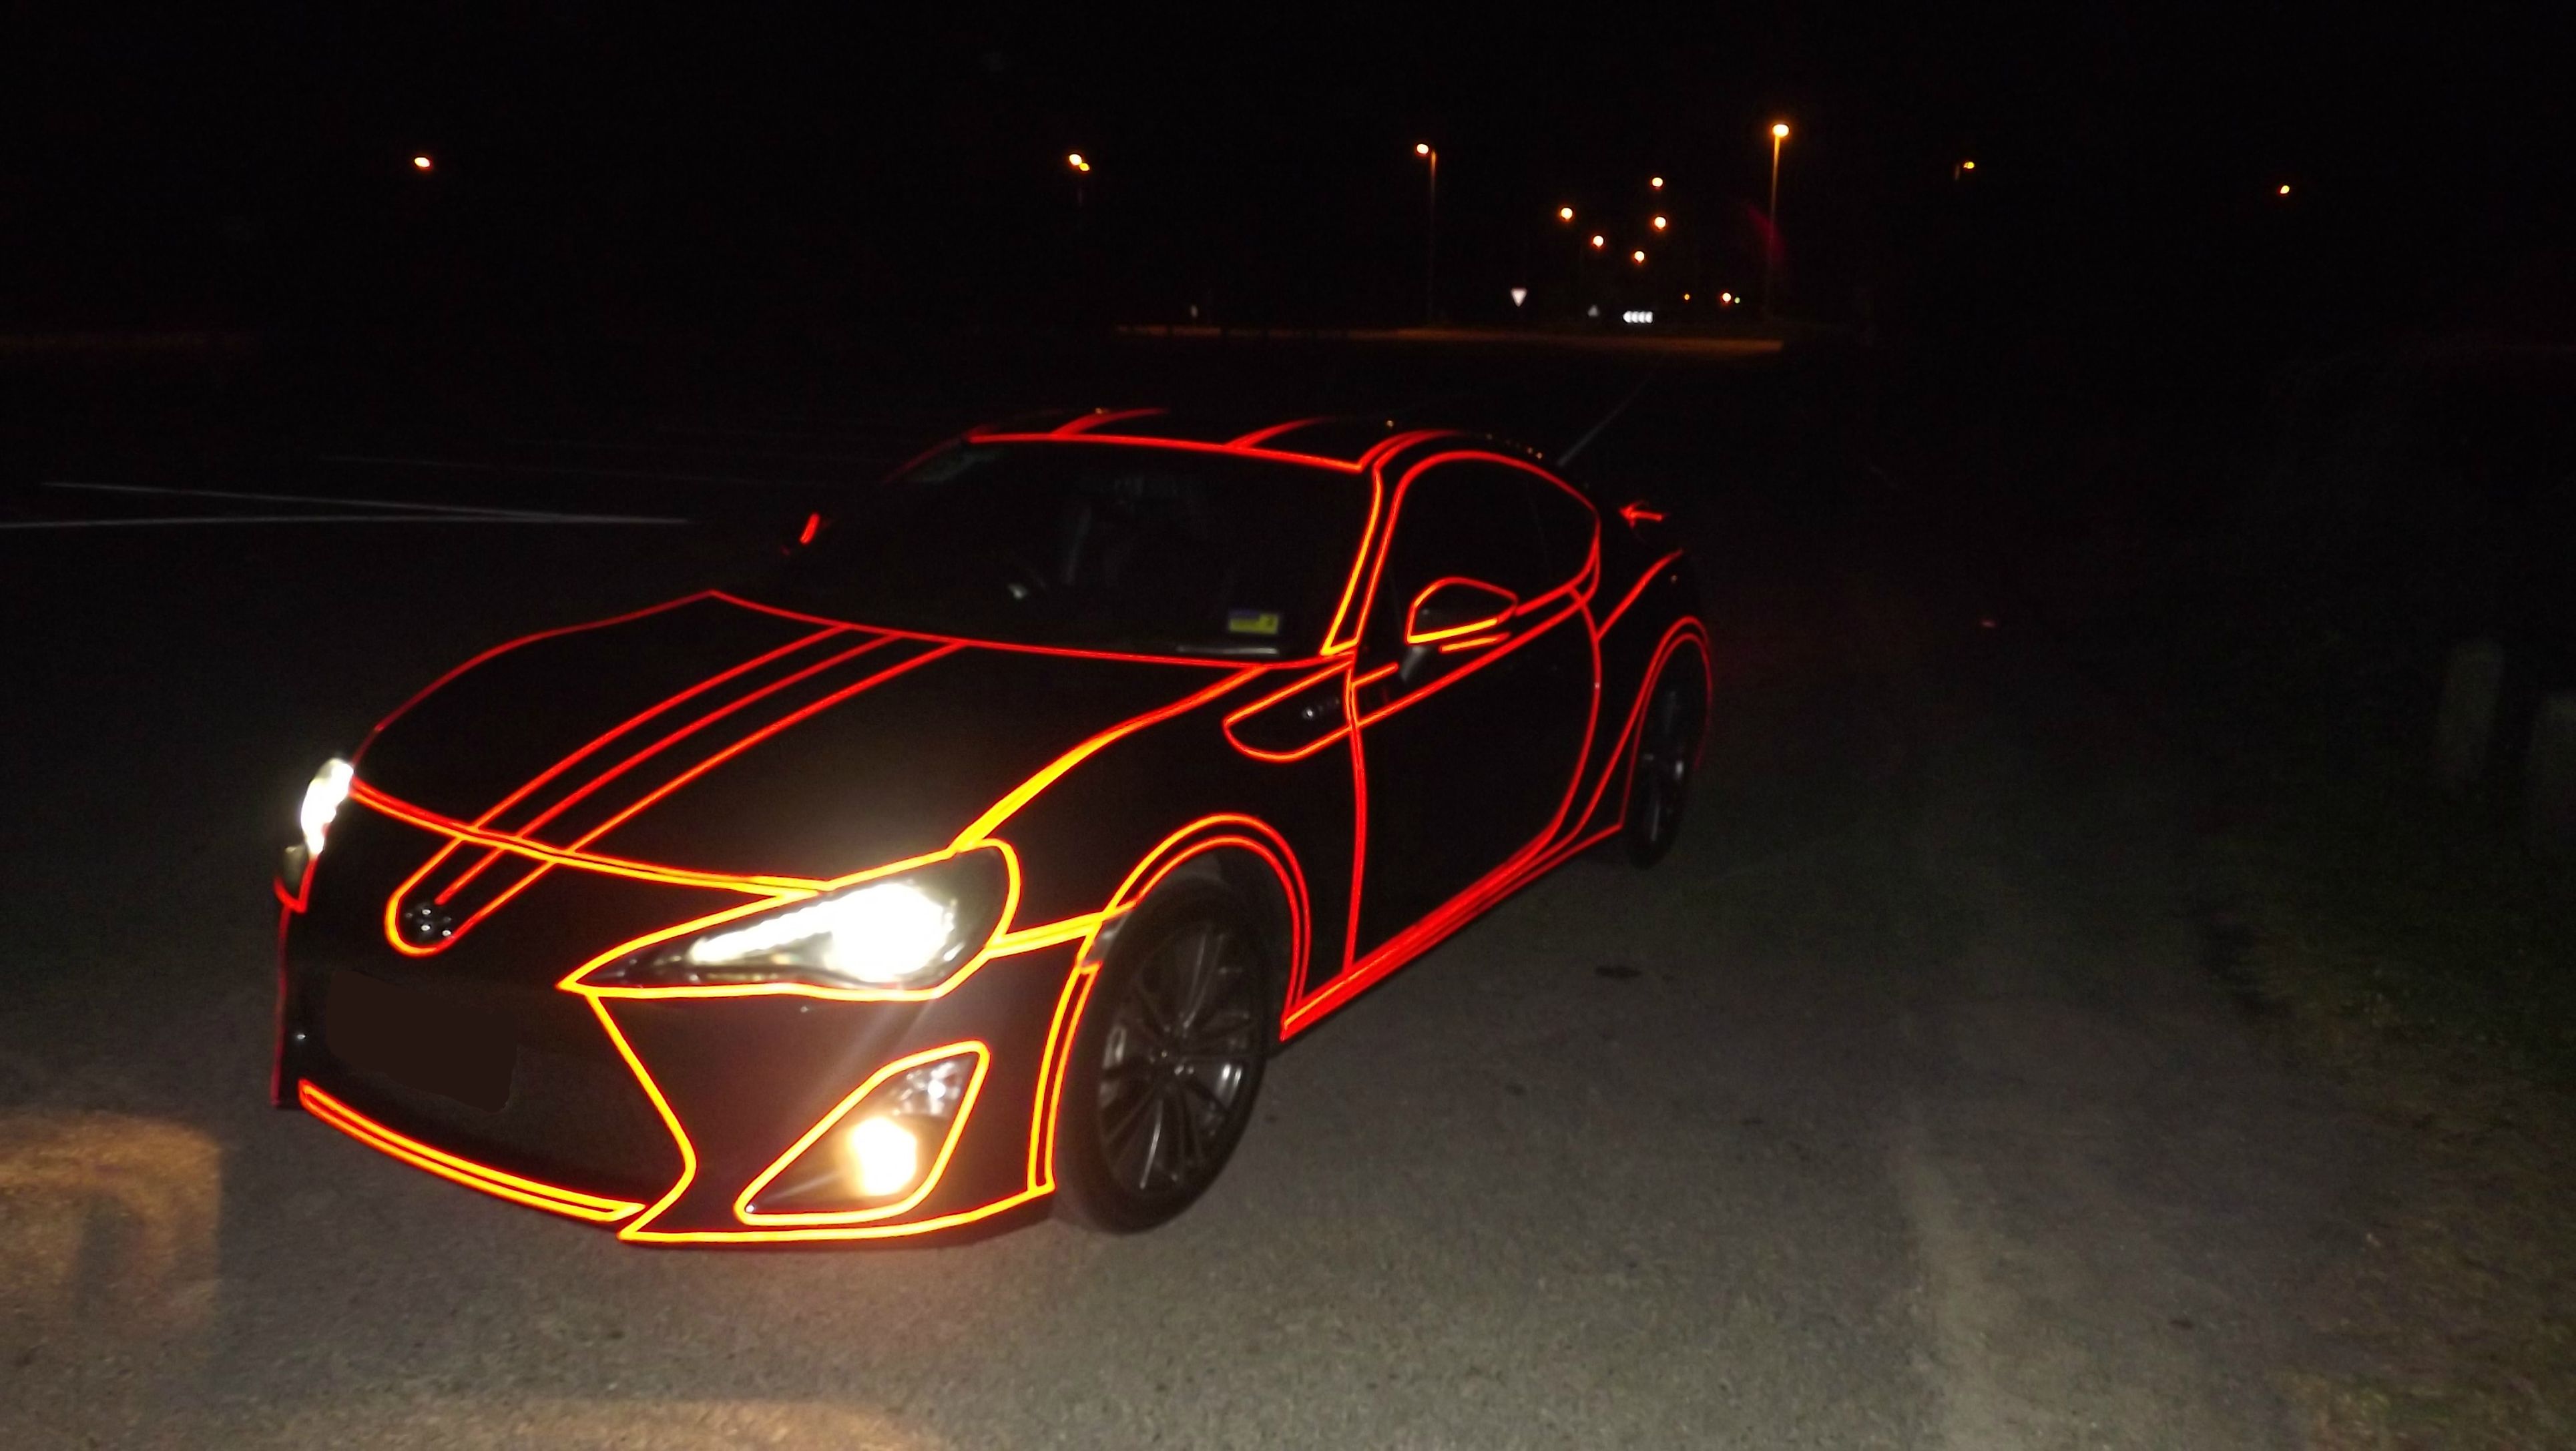 tron inspired car 